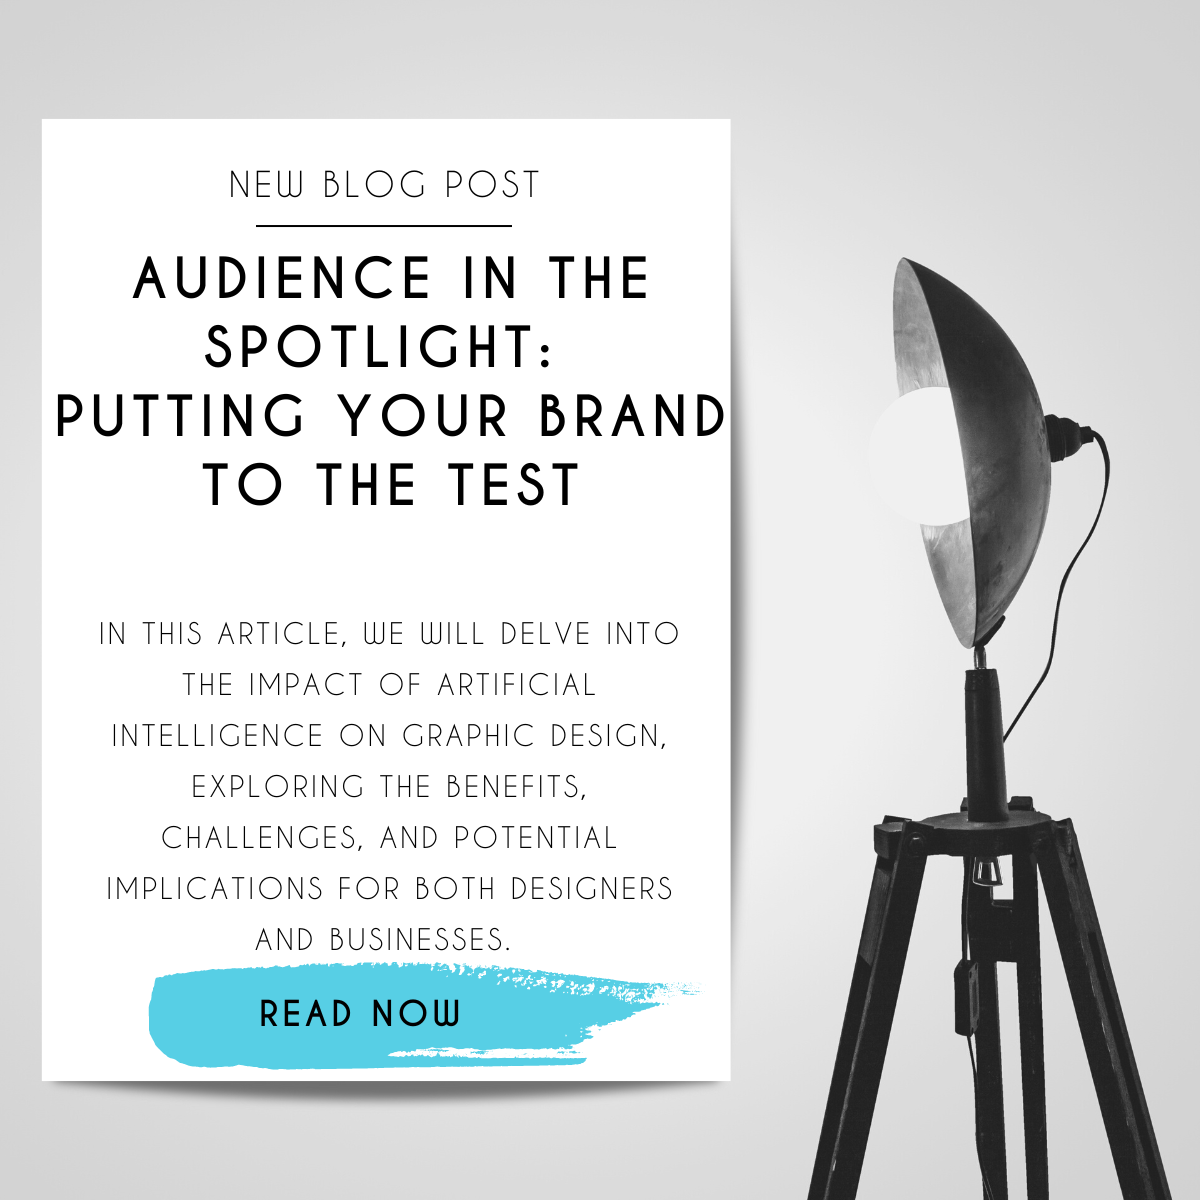 Audience in the Spotlight: Putting Your Brand to the Test